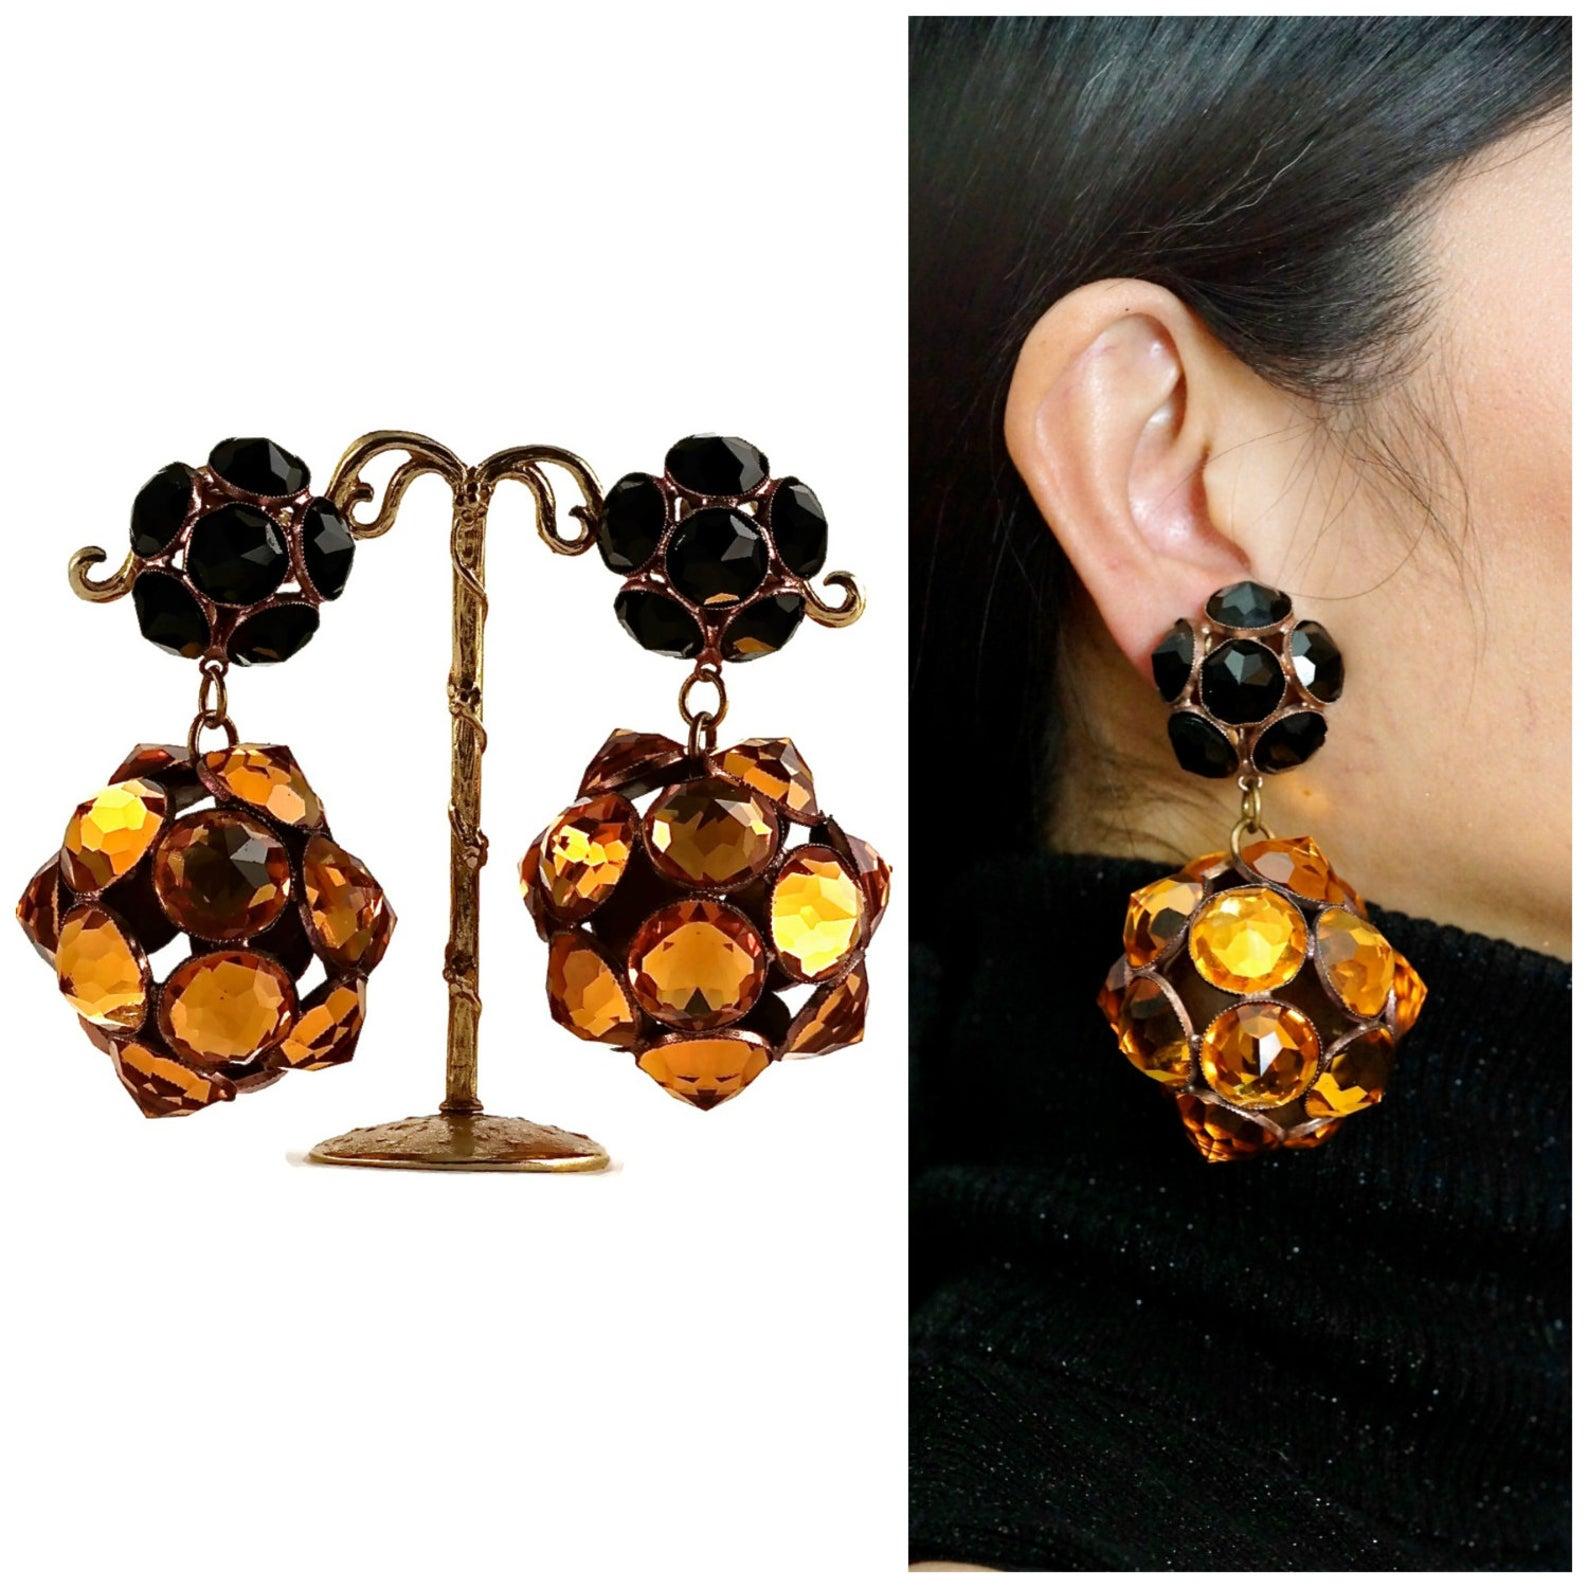 Vintage Massive YSL Yves Saint Laurent Disco Ball Rhinestone Flower Earrings

Measurements:
Height: 3 3/8 inches
Width: 2 inches

Features:
- 100% Authentic YVES SAINT LAURENT.
- Top part is black faceted rhinestones in flower form.
- Bottom part is